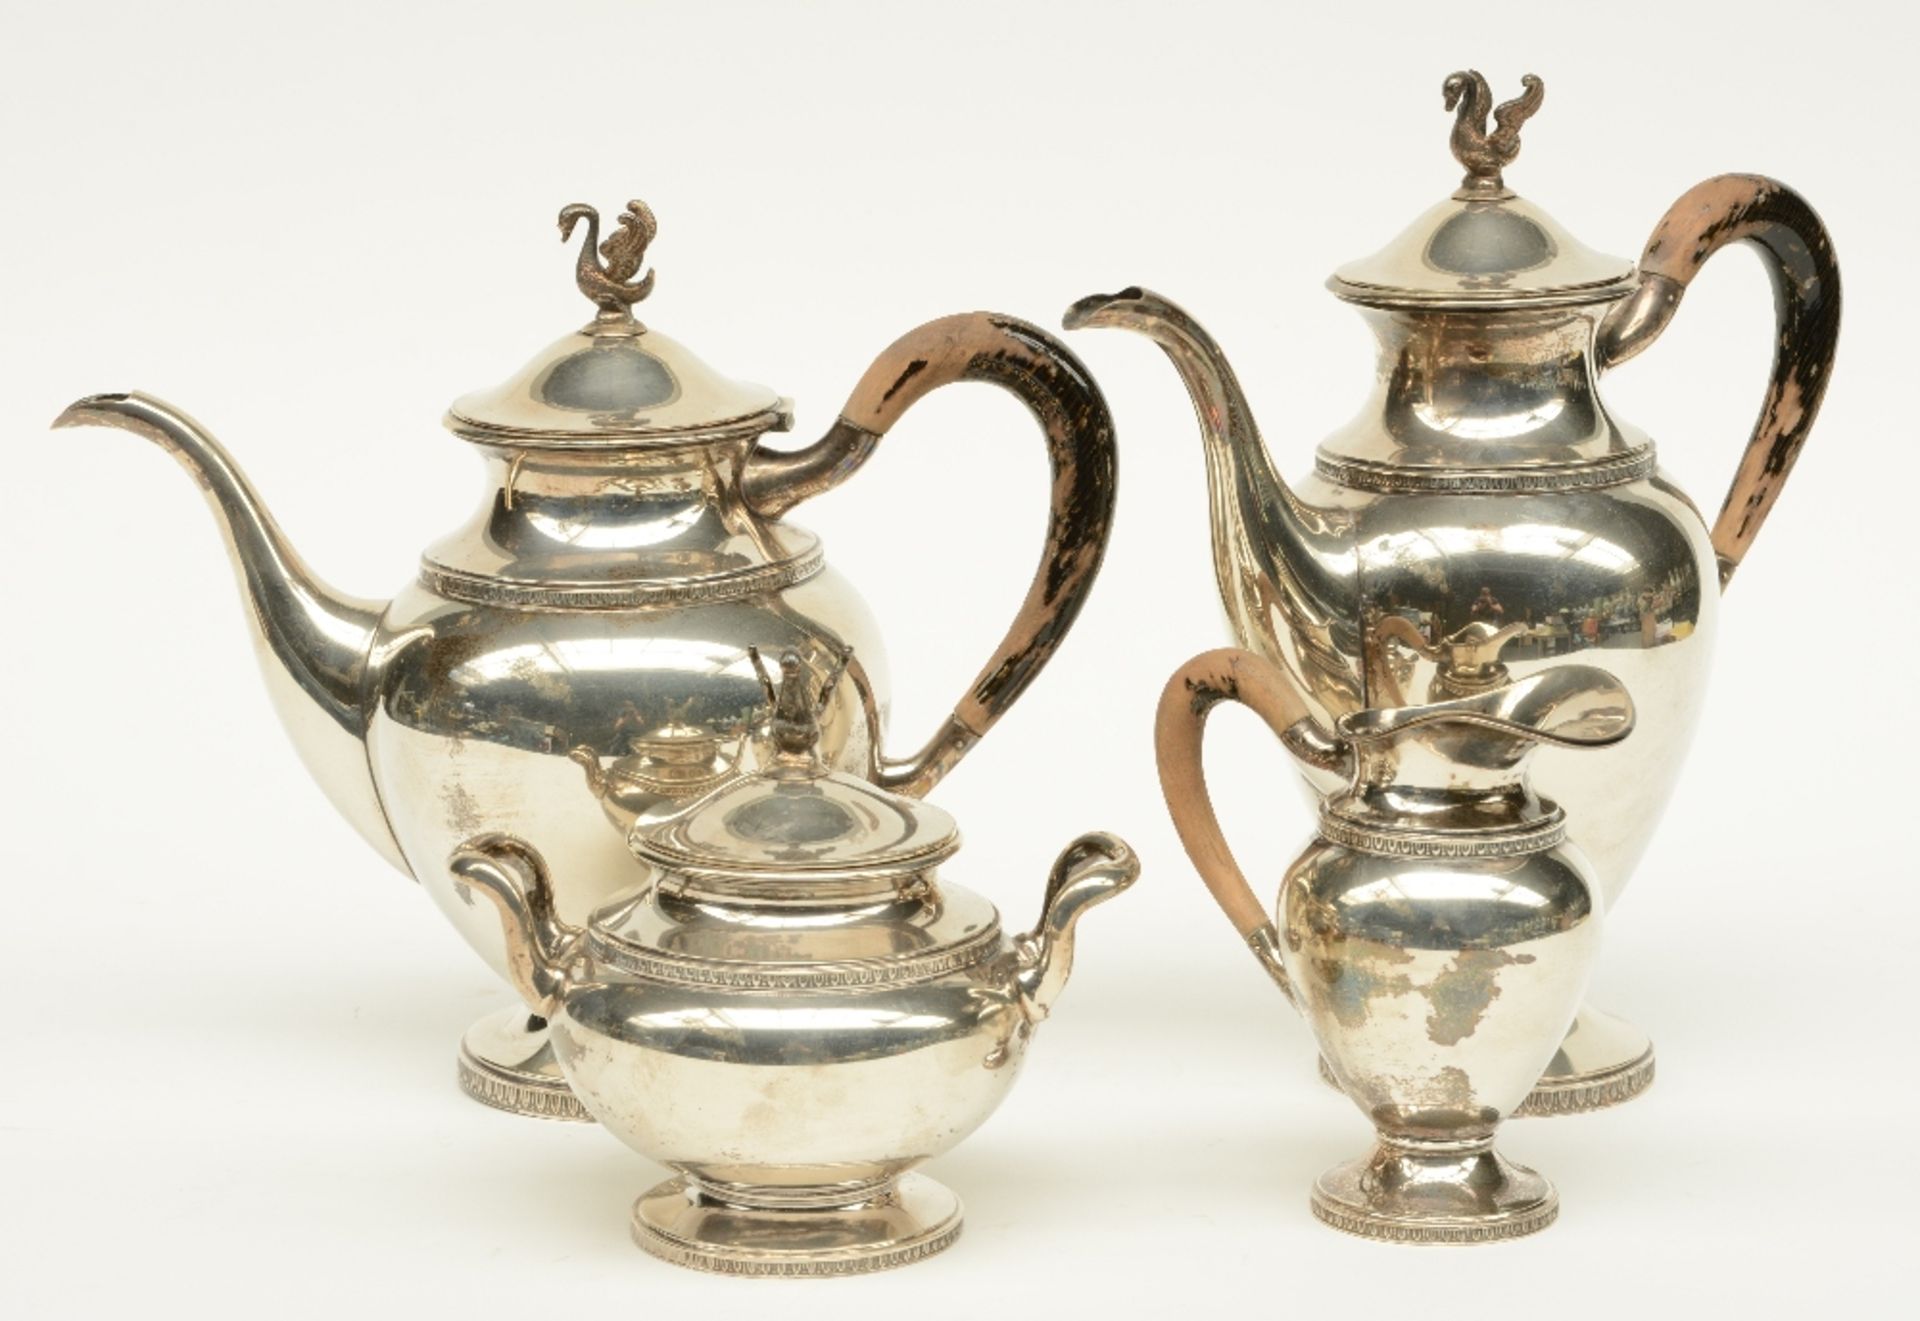 A silver coffee and tea set, 800/000, Belgium 1868 - 1942, makers' mark Debruyère, total weight 2.